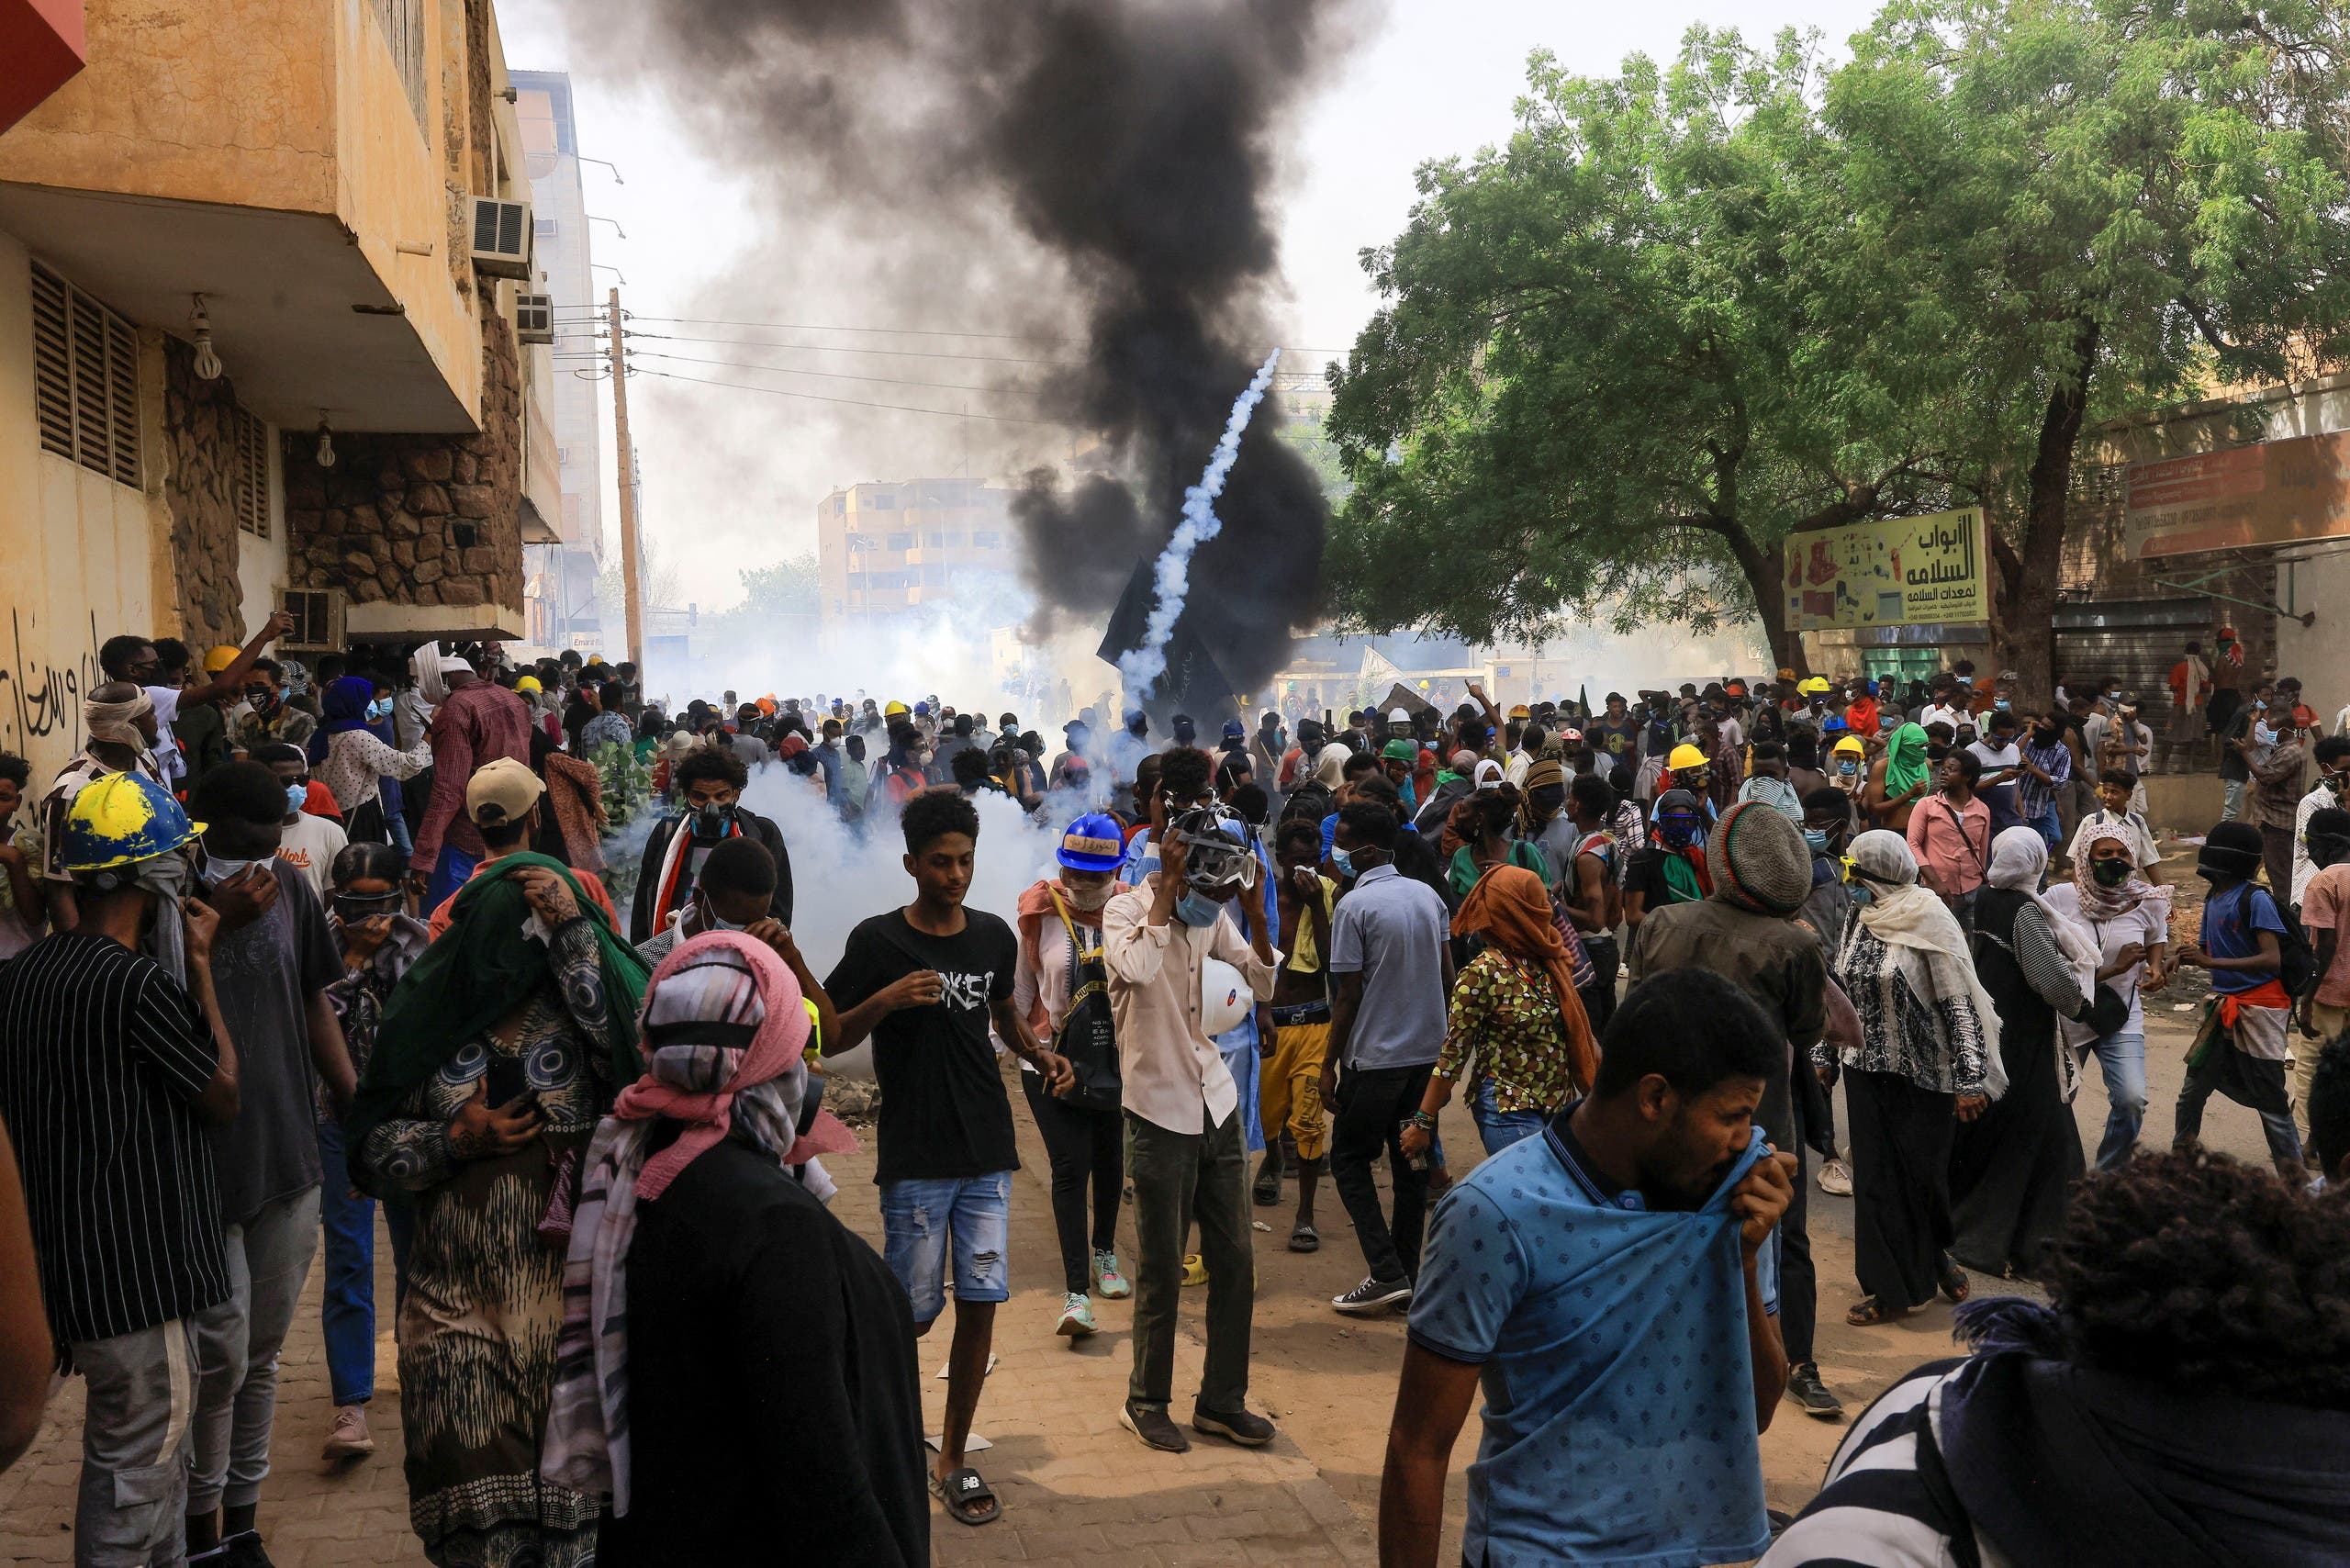 Previous protests in Khartoum last May (archive)